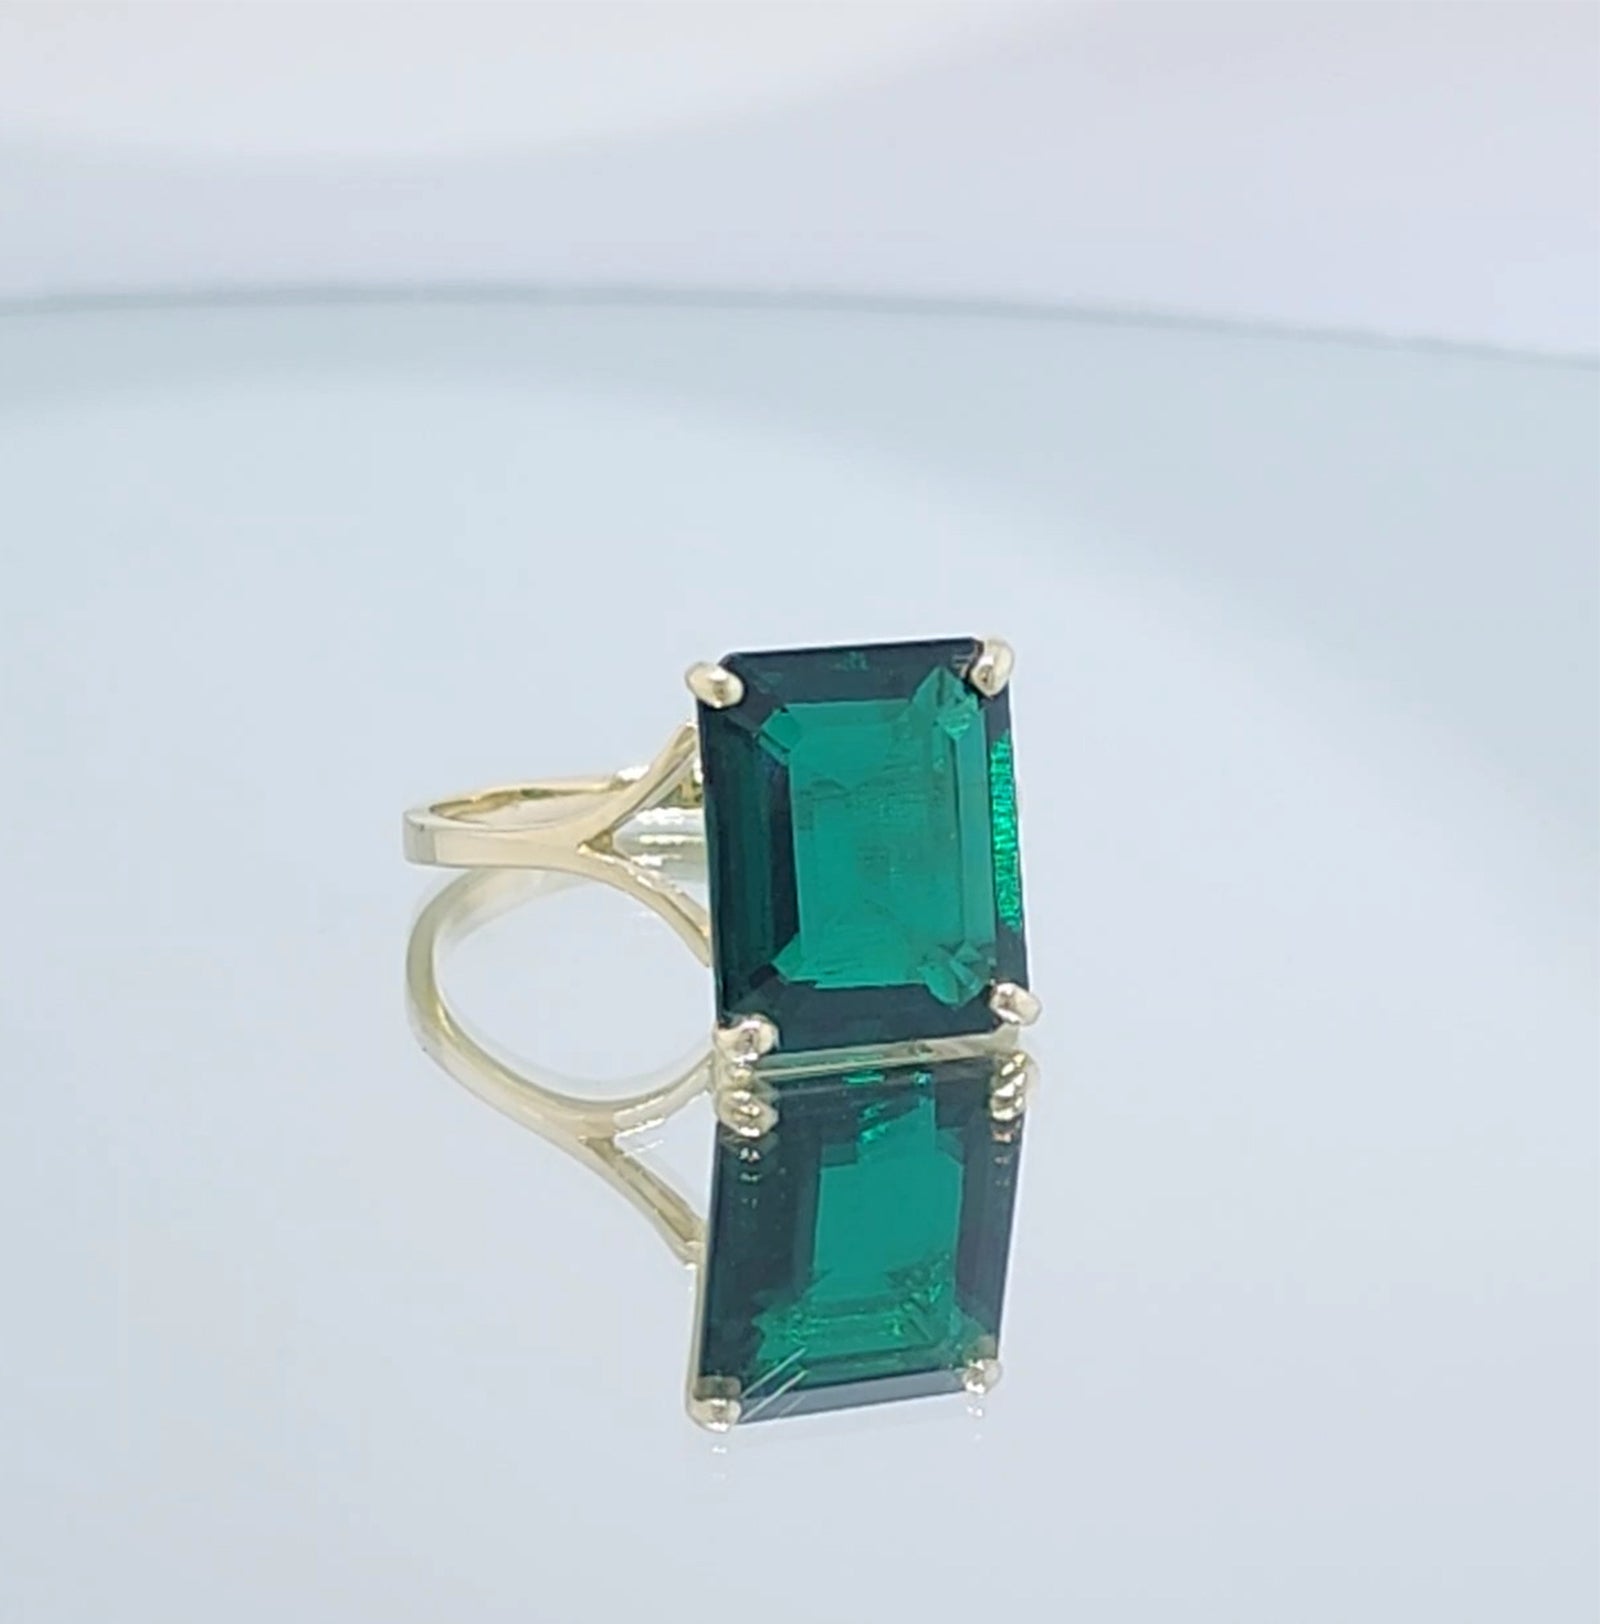 4.50 Carats 14K Solid Rose Gold Brilliant Emerald Cut Emerald Solitaire Ring with Genuine Vibrant Emerald Octagon Shape Anniversary Engagement Promise Her Him Unisex